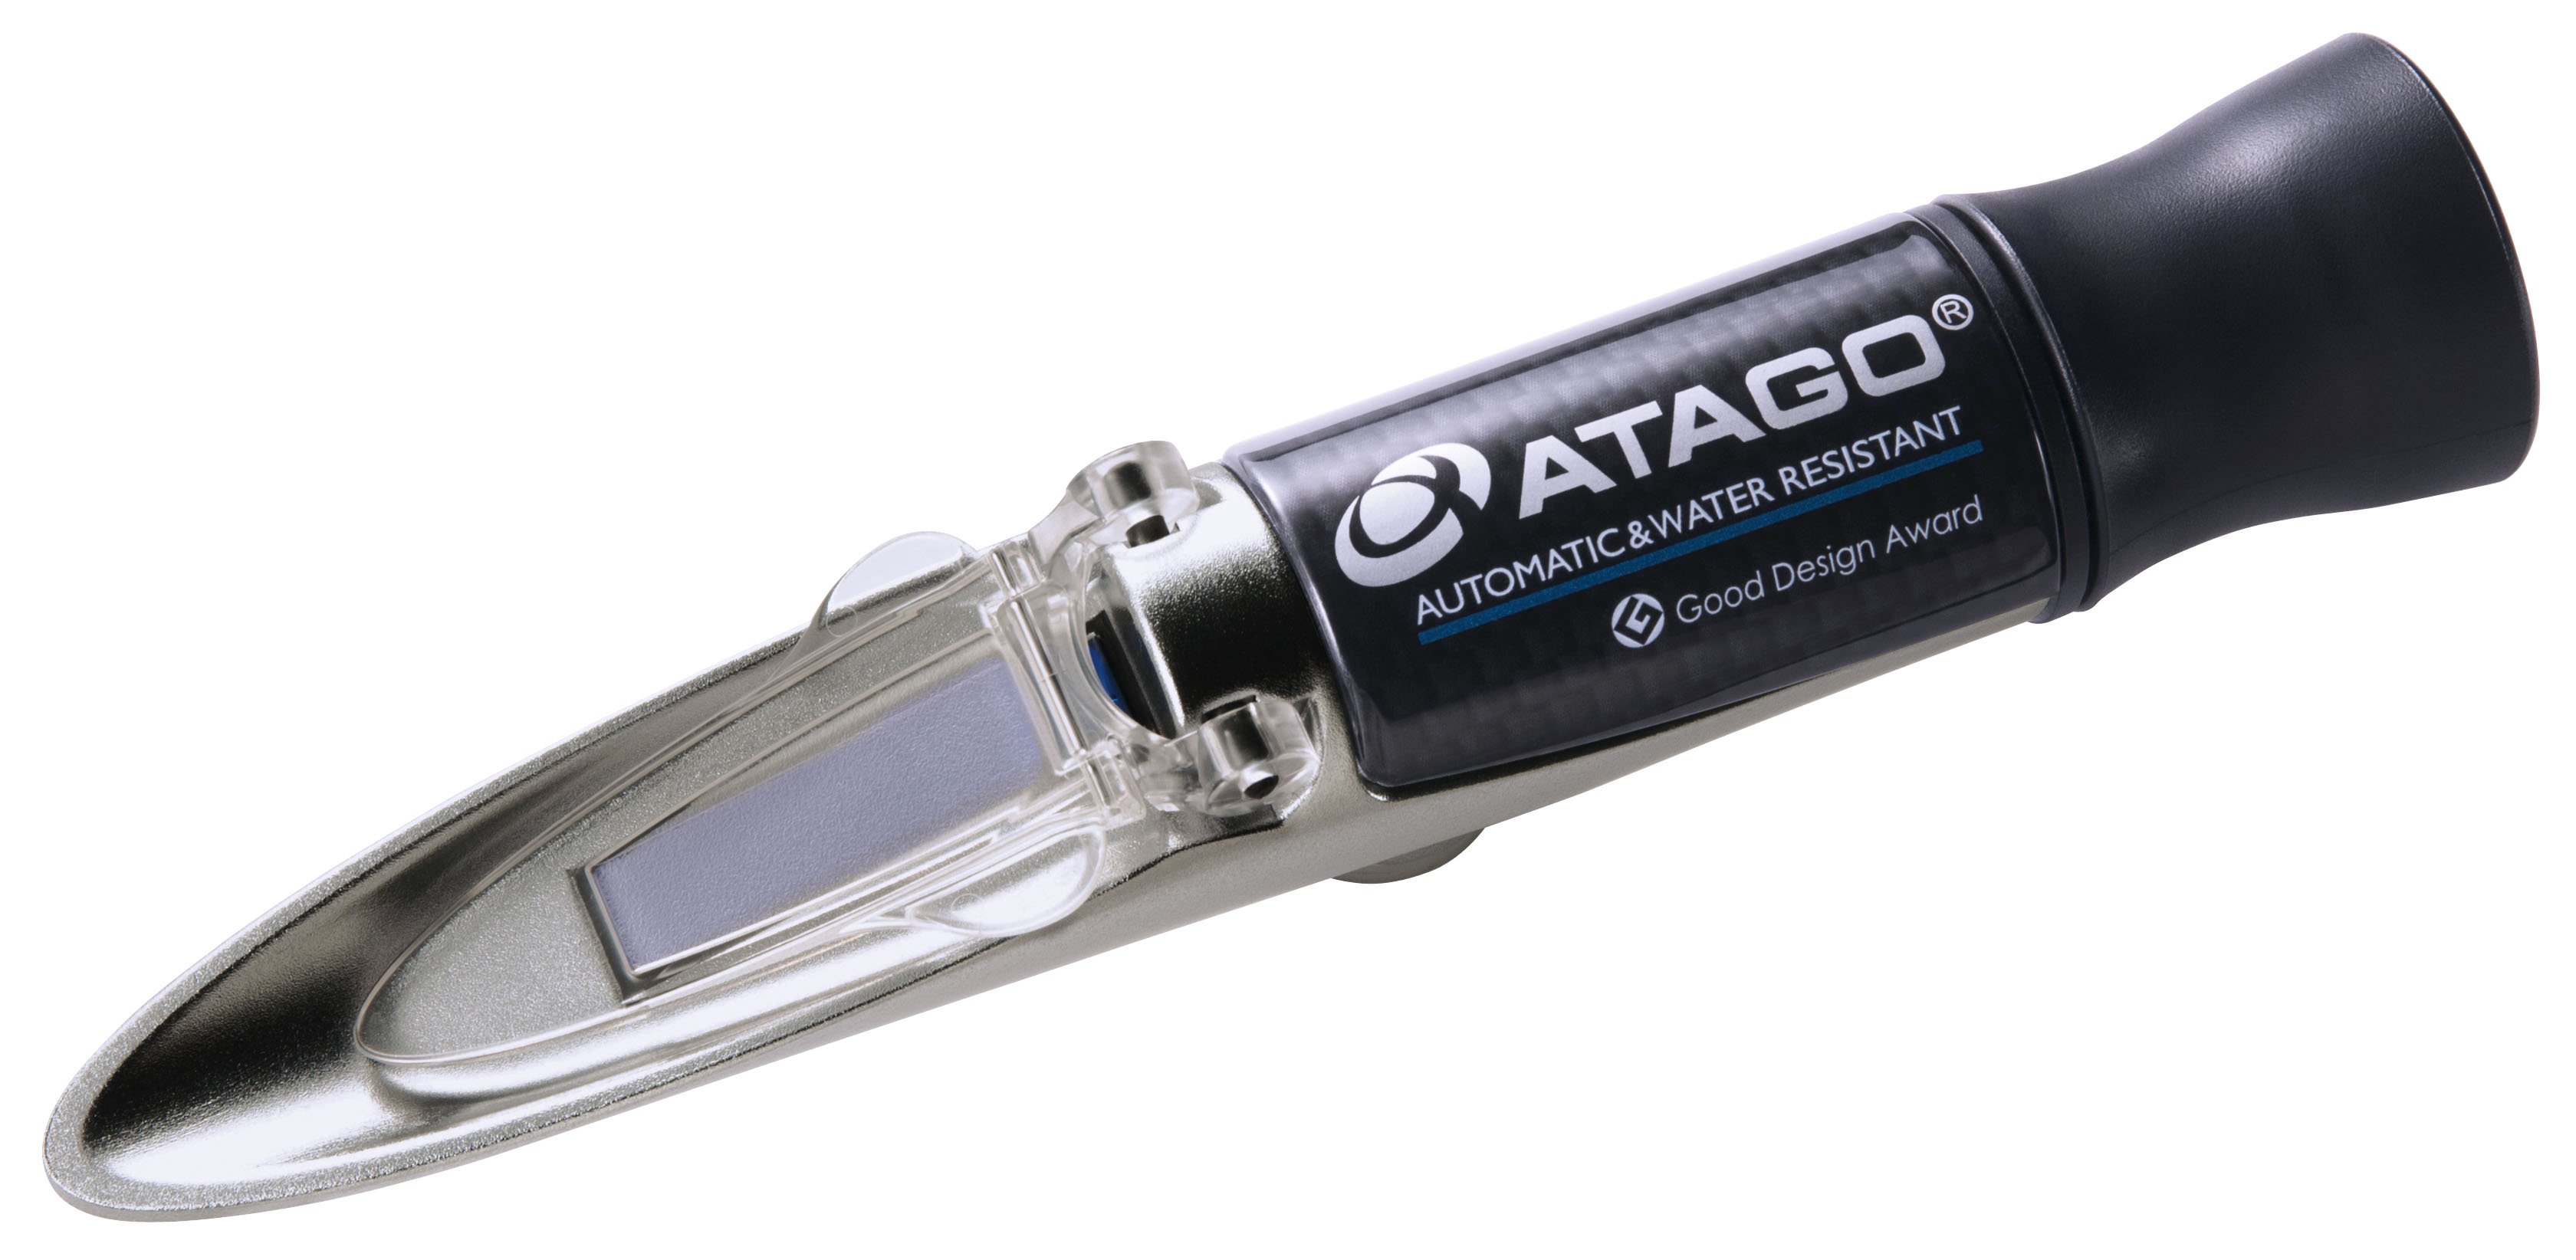 Atago Master Series, Optical Analogue Hand-Held Refractometers - Automatic Temperature Compensation and Water Resistant